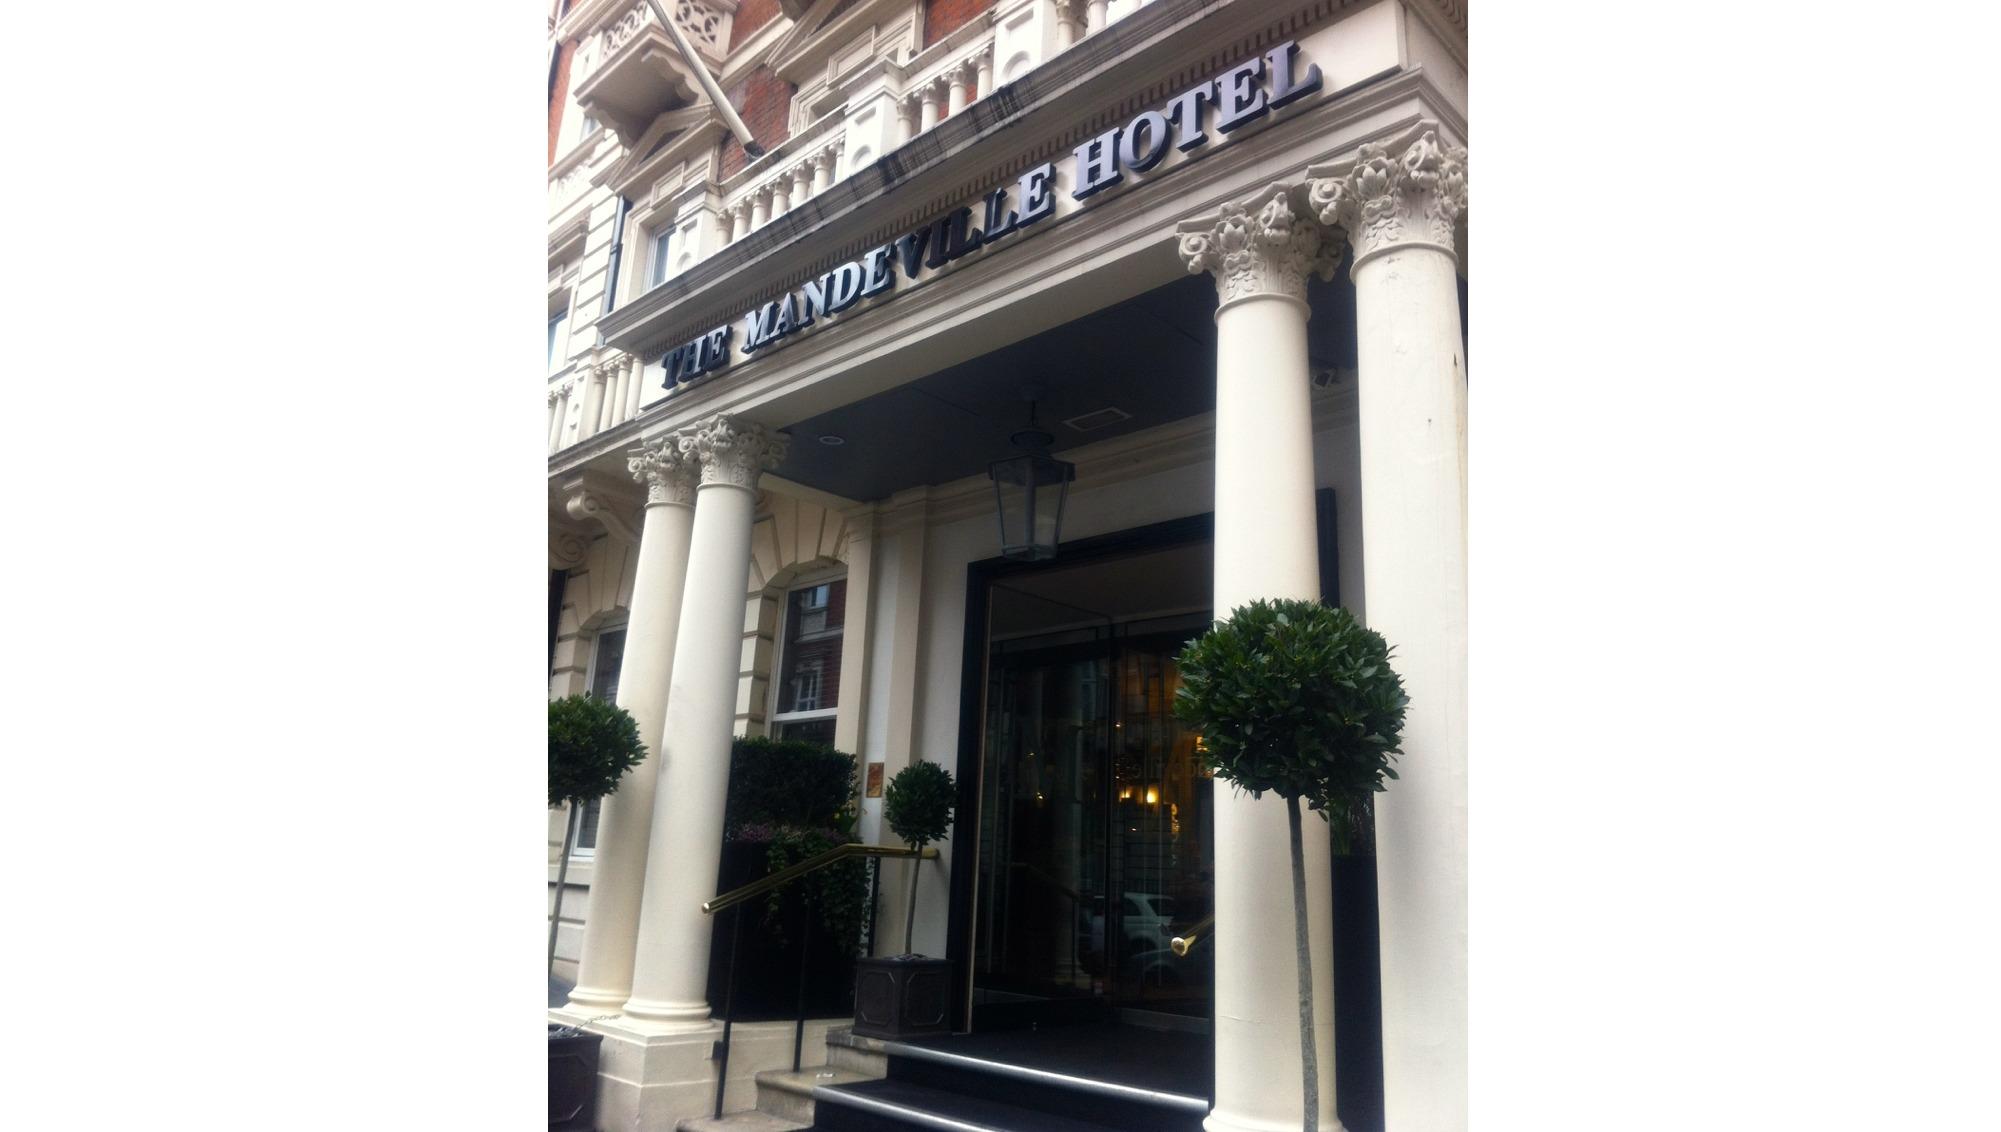 The Mandeville Hotel, Reform Social and Grill photo #6